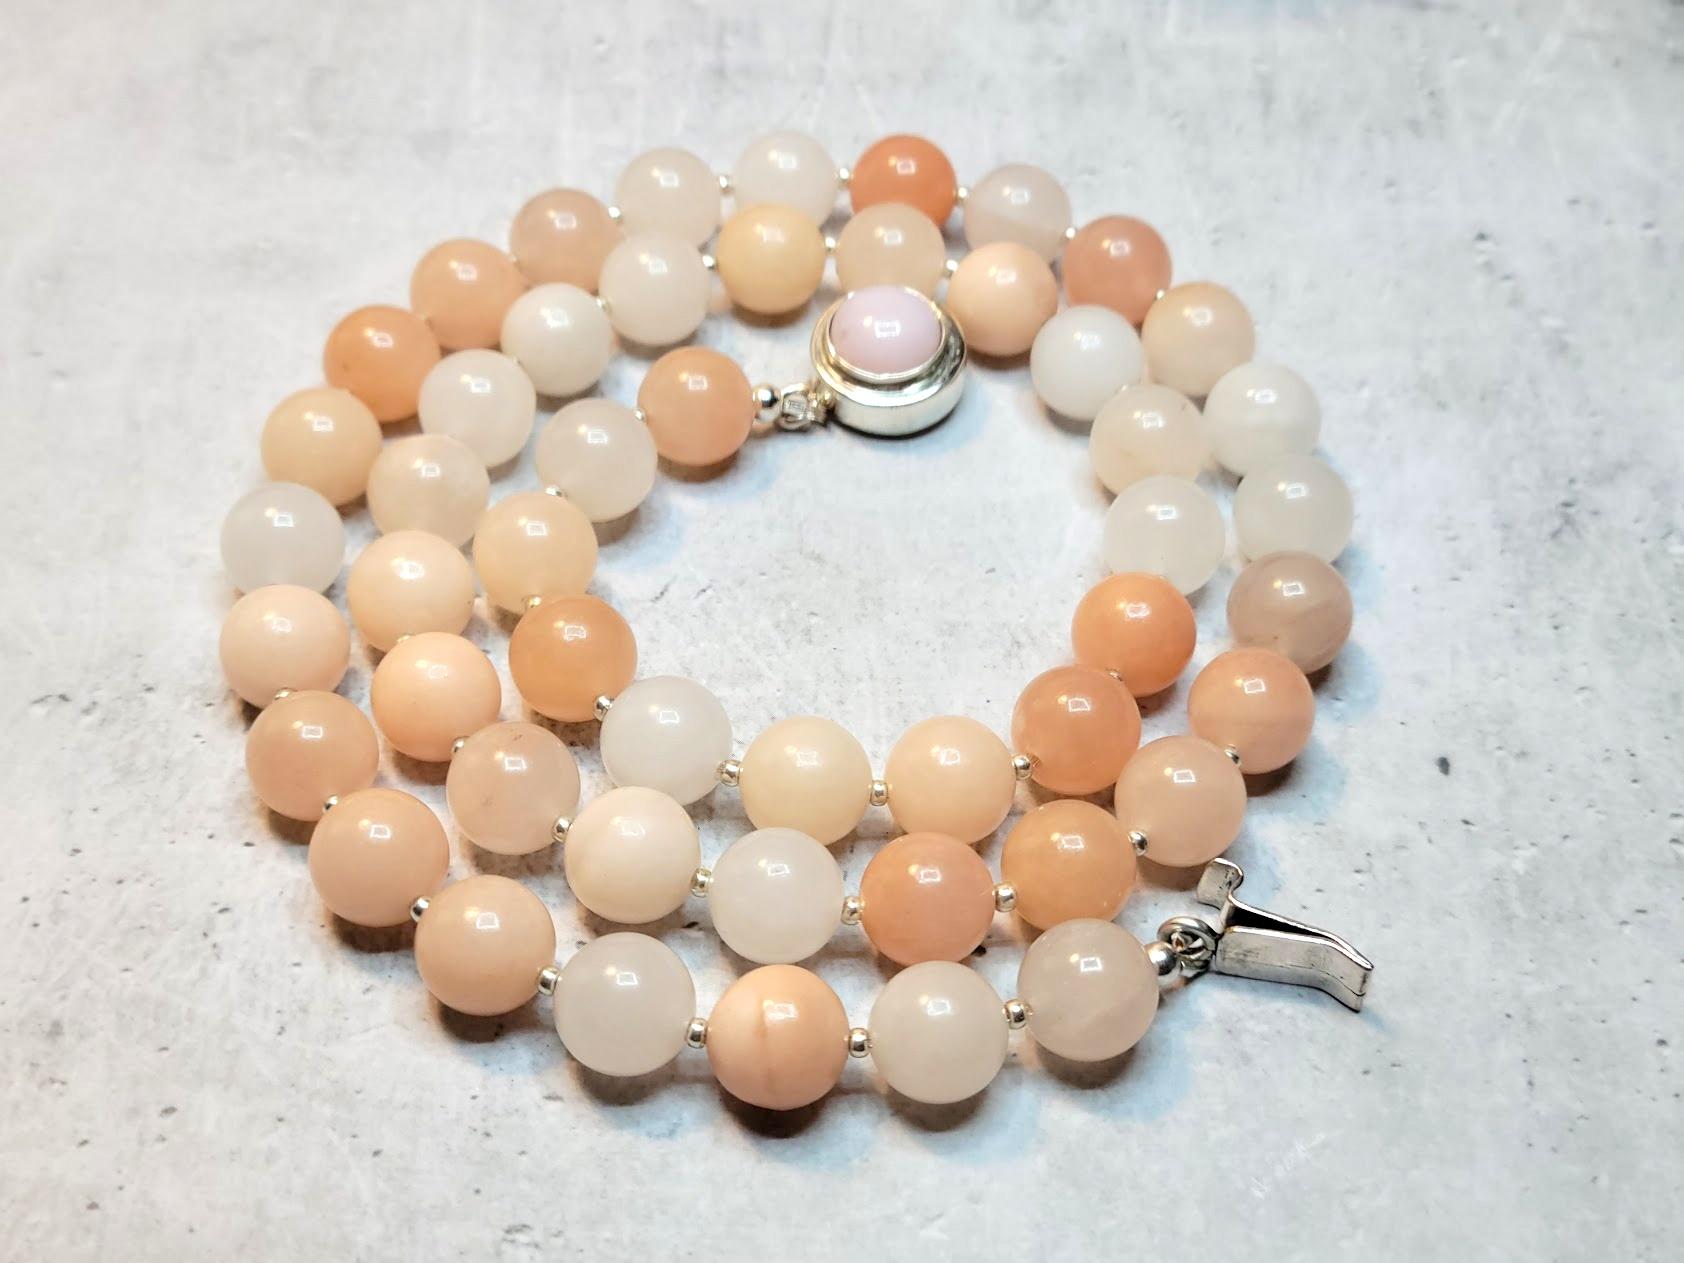 The length of the necklace is 24.5 inches (62 cm). The size of one bead is 10.5 mm.
Beads are a very gentle color mixed with light pink, soft rose, peach, and soft vanilla.
The color is authentic and natural. No thermal or other mechanical